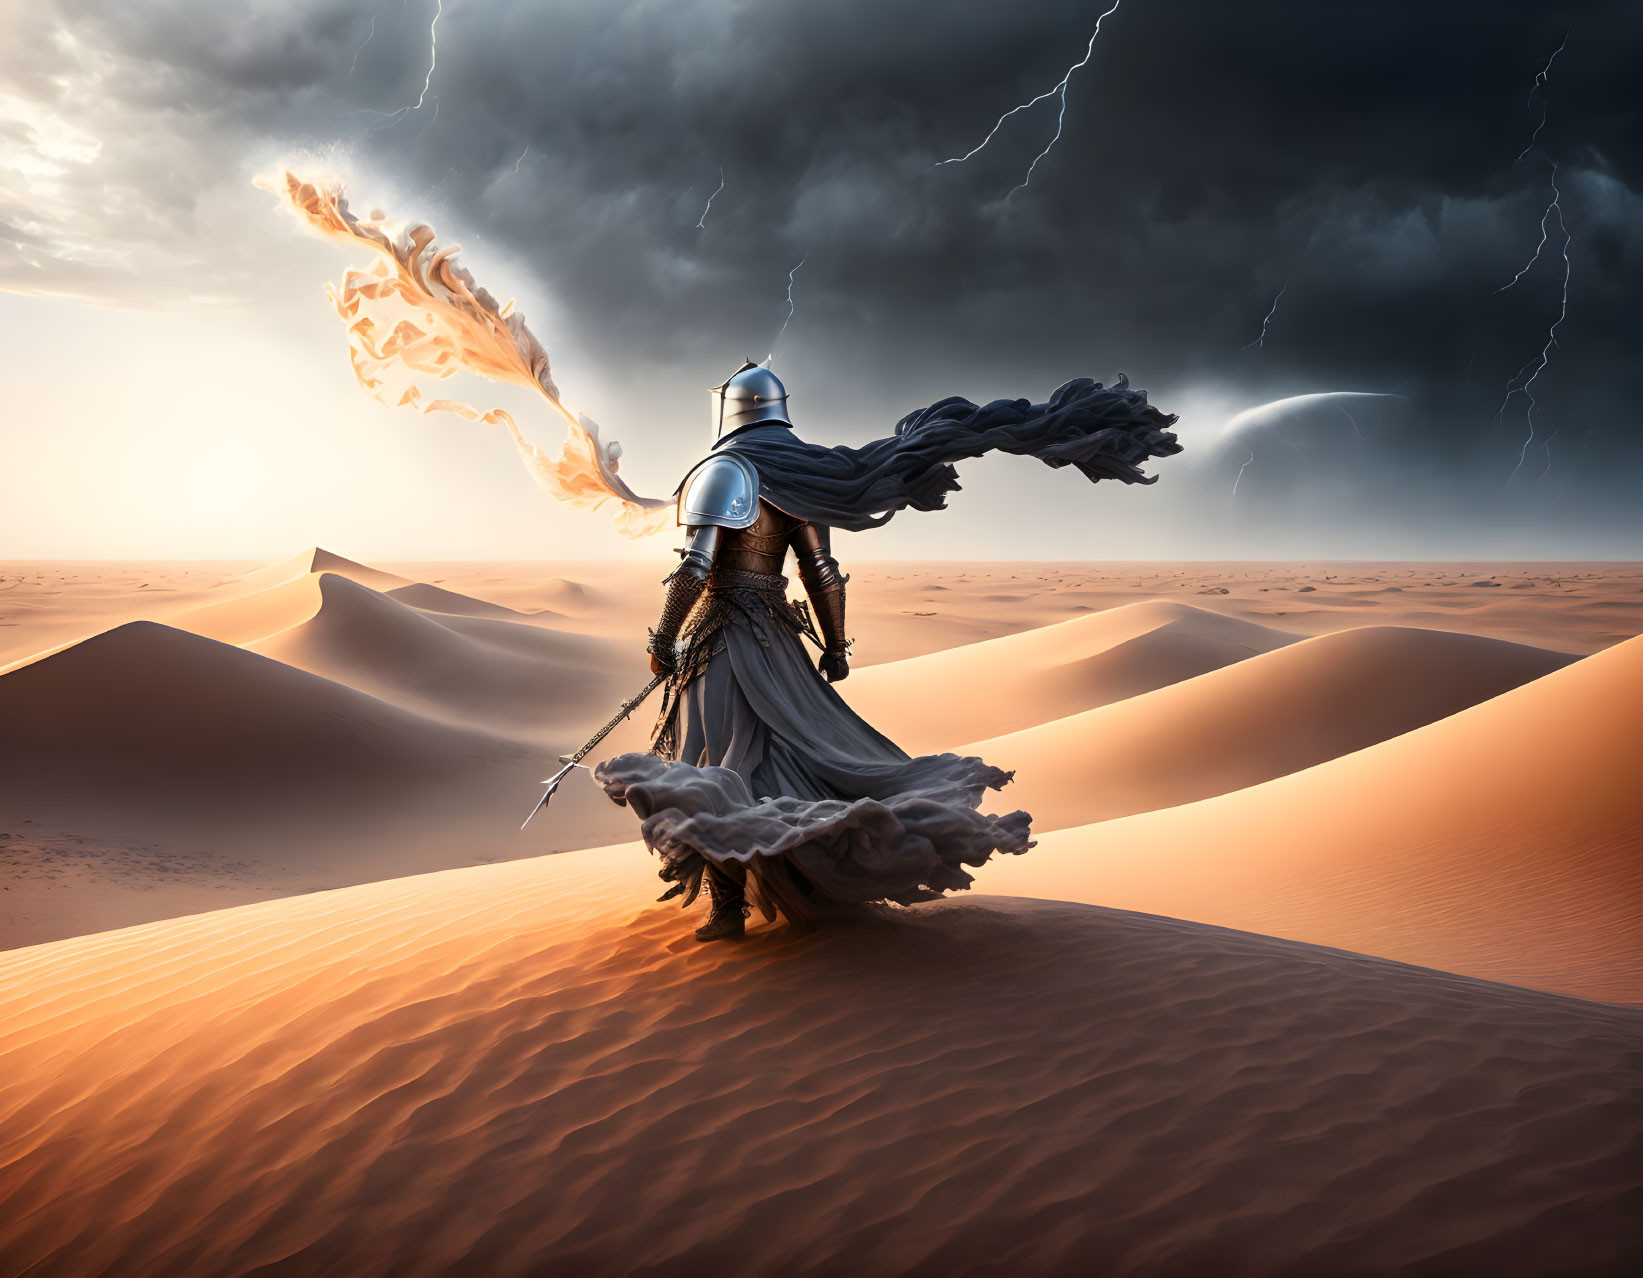 Armored knight with fiery sword faces storm in desert landscape